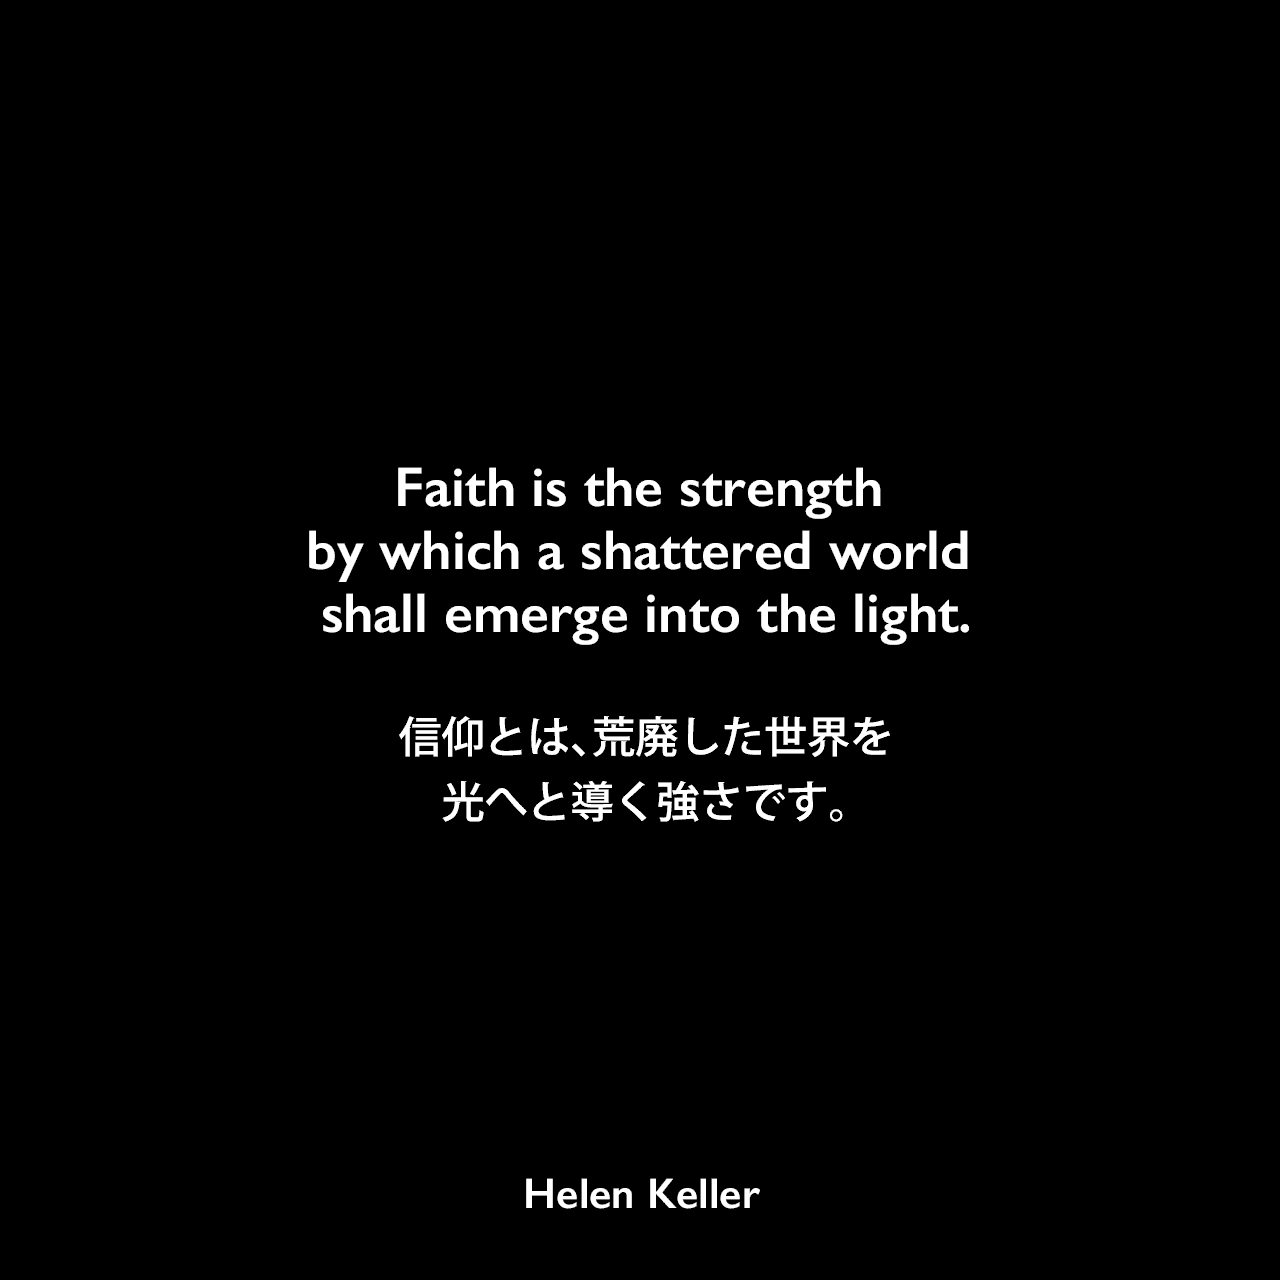 Faith is the strength by which a shattered world shall emerge into the light.信仰とは、荒廃した世界を光へと導く強さです。Helen Keller